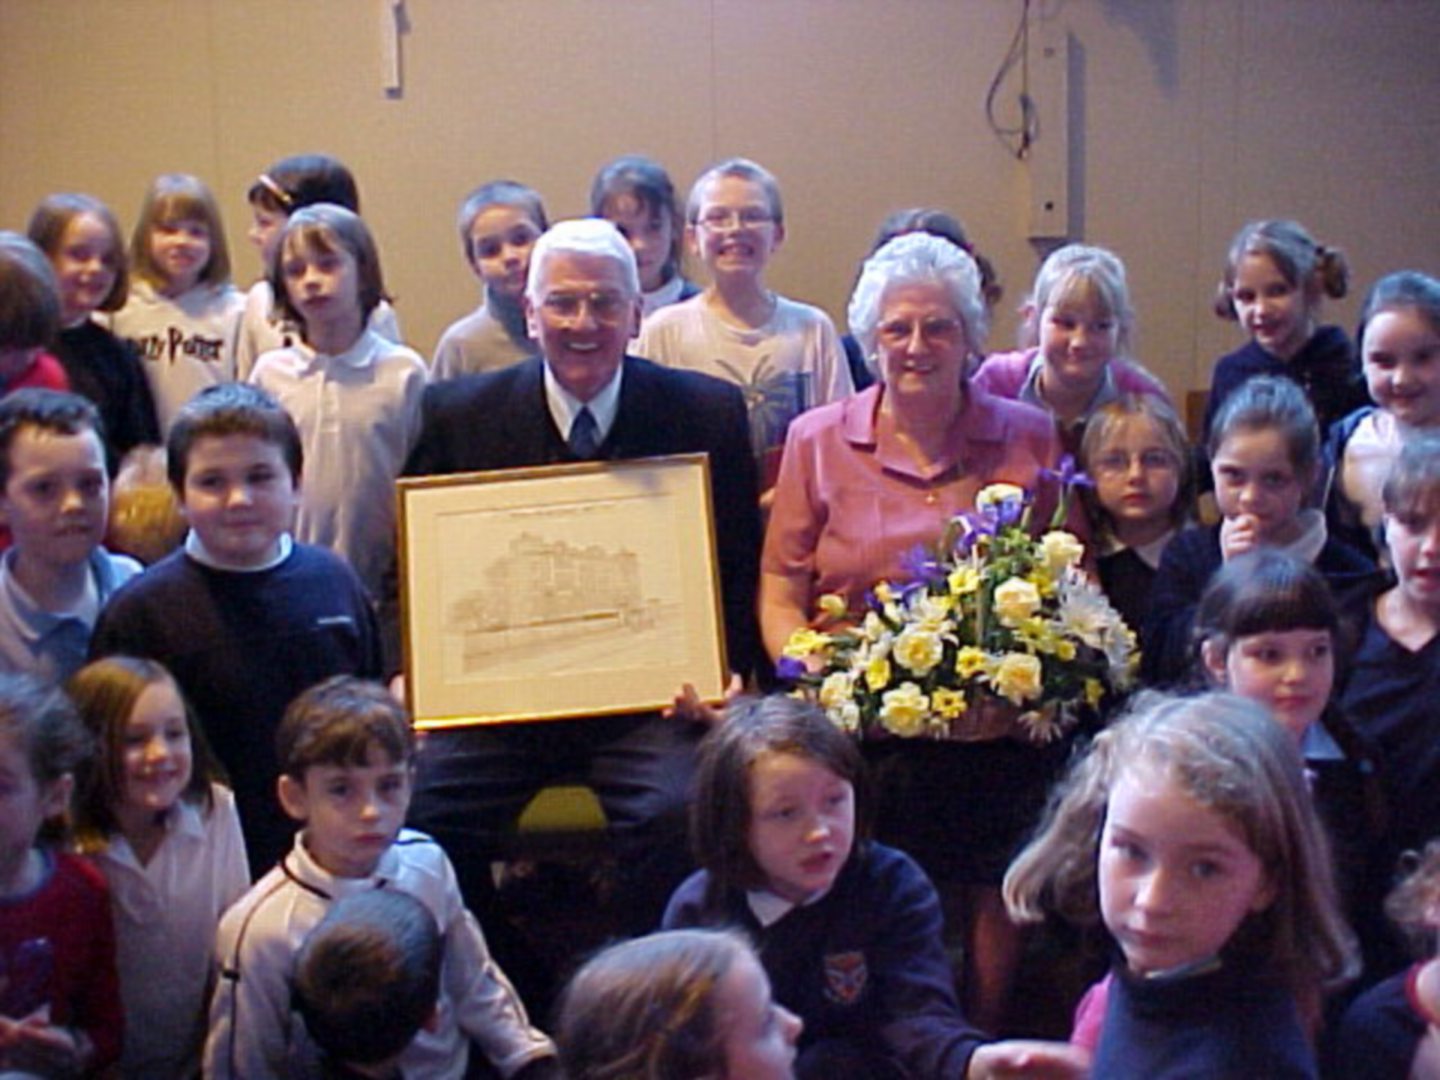  A presentation for Ernie Mair, who retired as lollipop man at Walker Road School in January 2002.